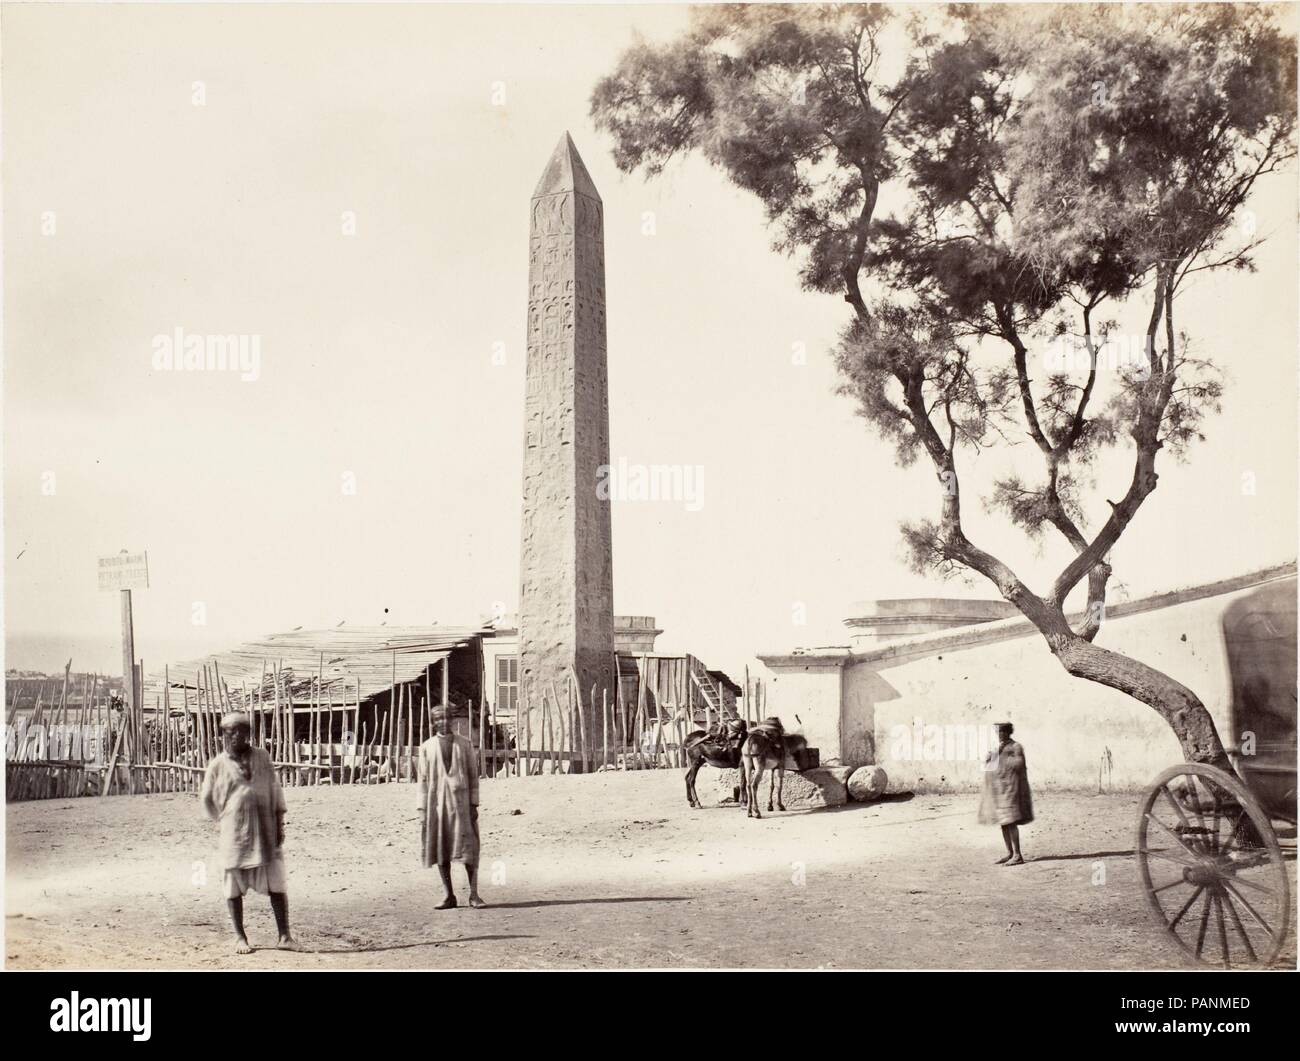 [Egyptian Obelisk, 'Cleopatra's Needle,' in Alexandria, Egypt]. Artist: Attributed to Francis Frith (British, Chesterfield, Derbyshire 1822-1898 Cannes, France). Dimensions: Image: 15.5 x 20.8 cm (6 1/8 x 8 3/16 in.). Date: ca. 1870.  Here the Central Park obelisk sits in its late nineteenth-century environment, a neglected area of the Alexandria harbor. What this photograph did not capture was the new buildings going up nearby, indicating the harbor was undergoing modernization. It was this development that created an atmosphere in which Egyptian nationalists in 1880 argued that the obelisk s Stock Photo